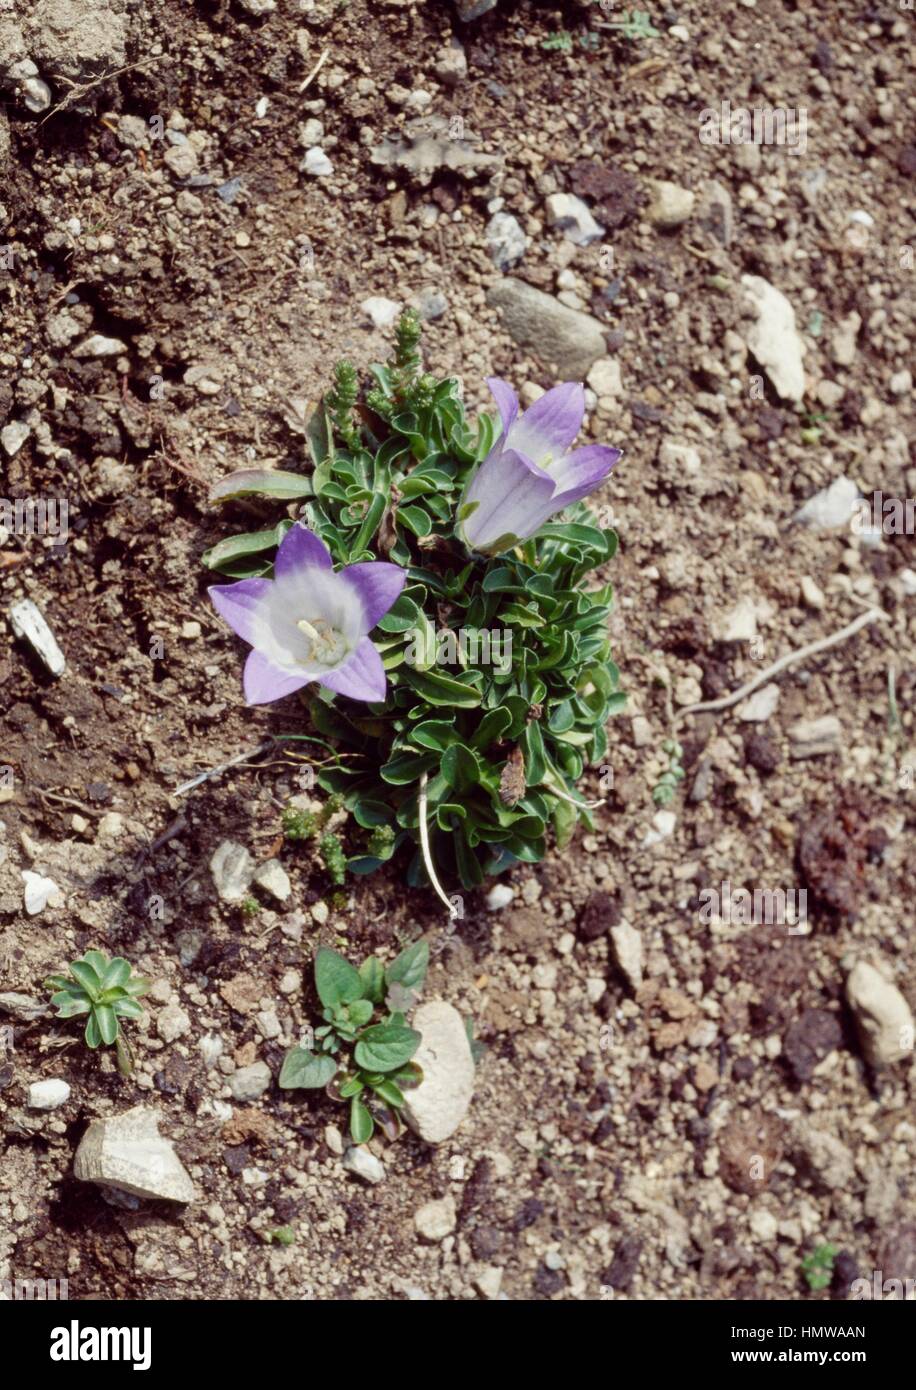 Toothed bellflower (Campanula tridentata), Campanulaceae. Stock Photo